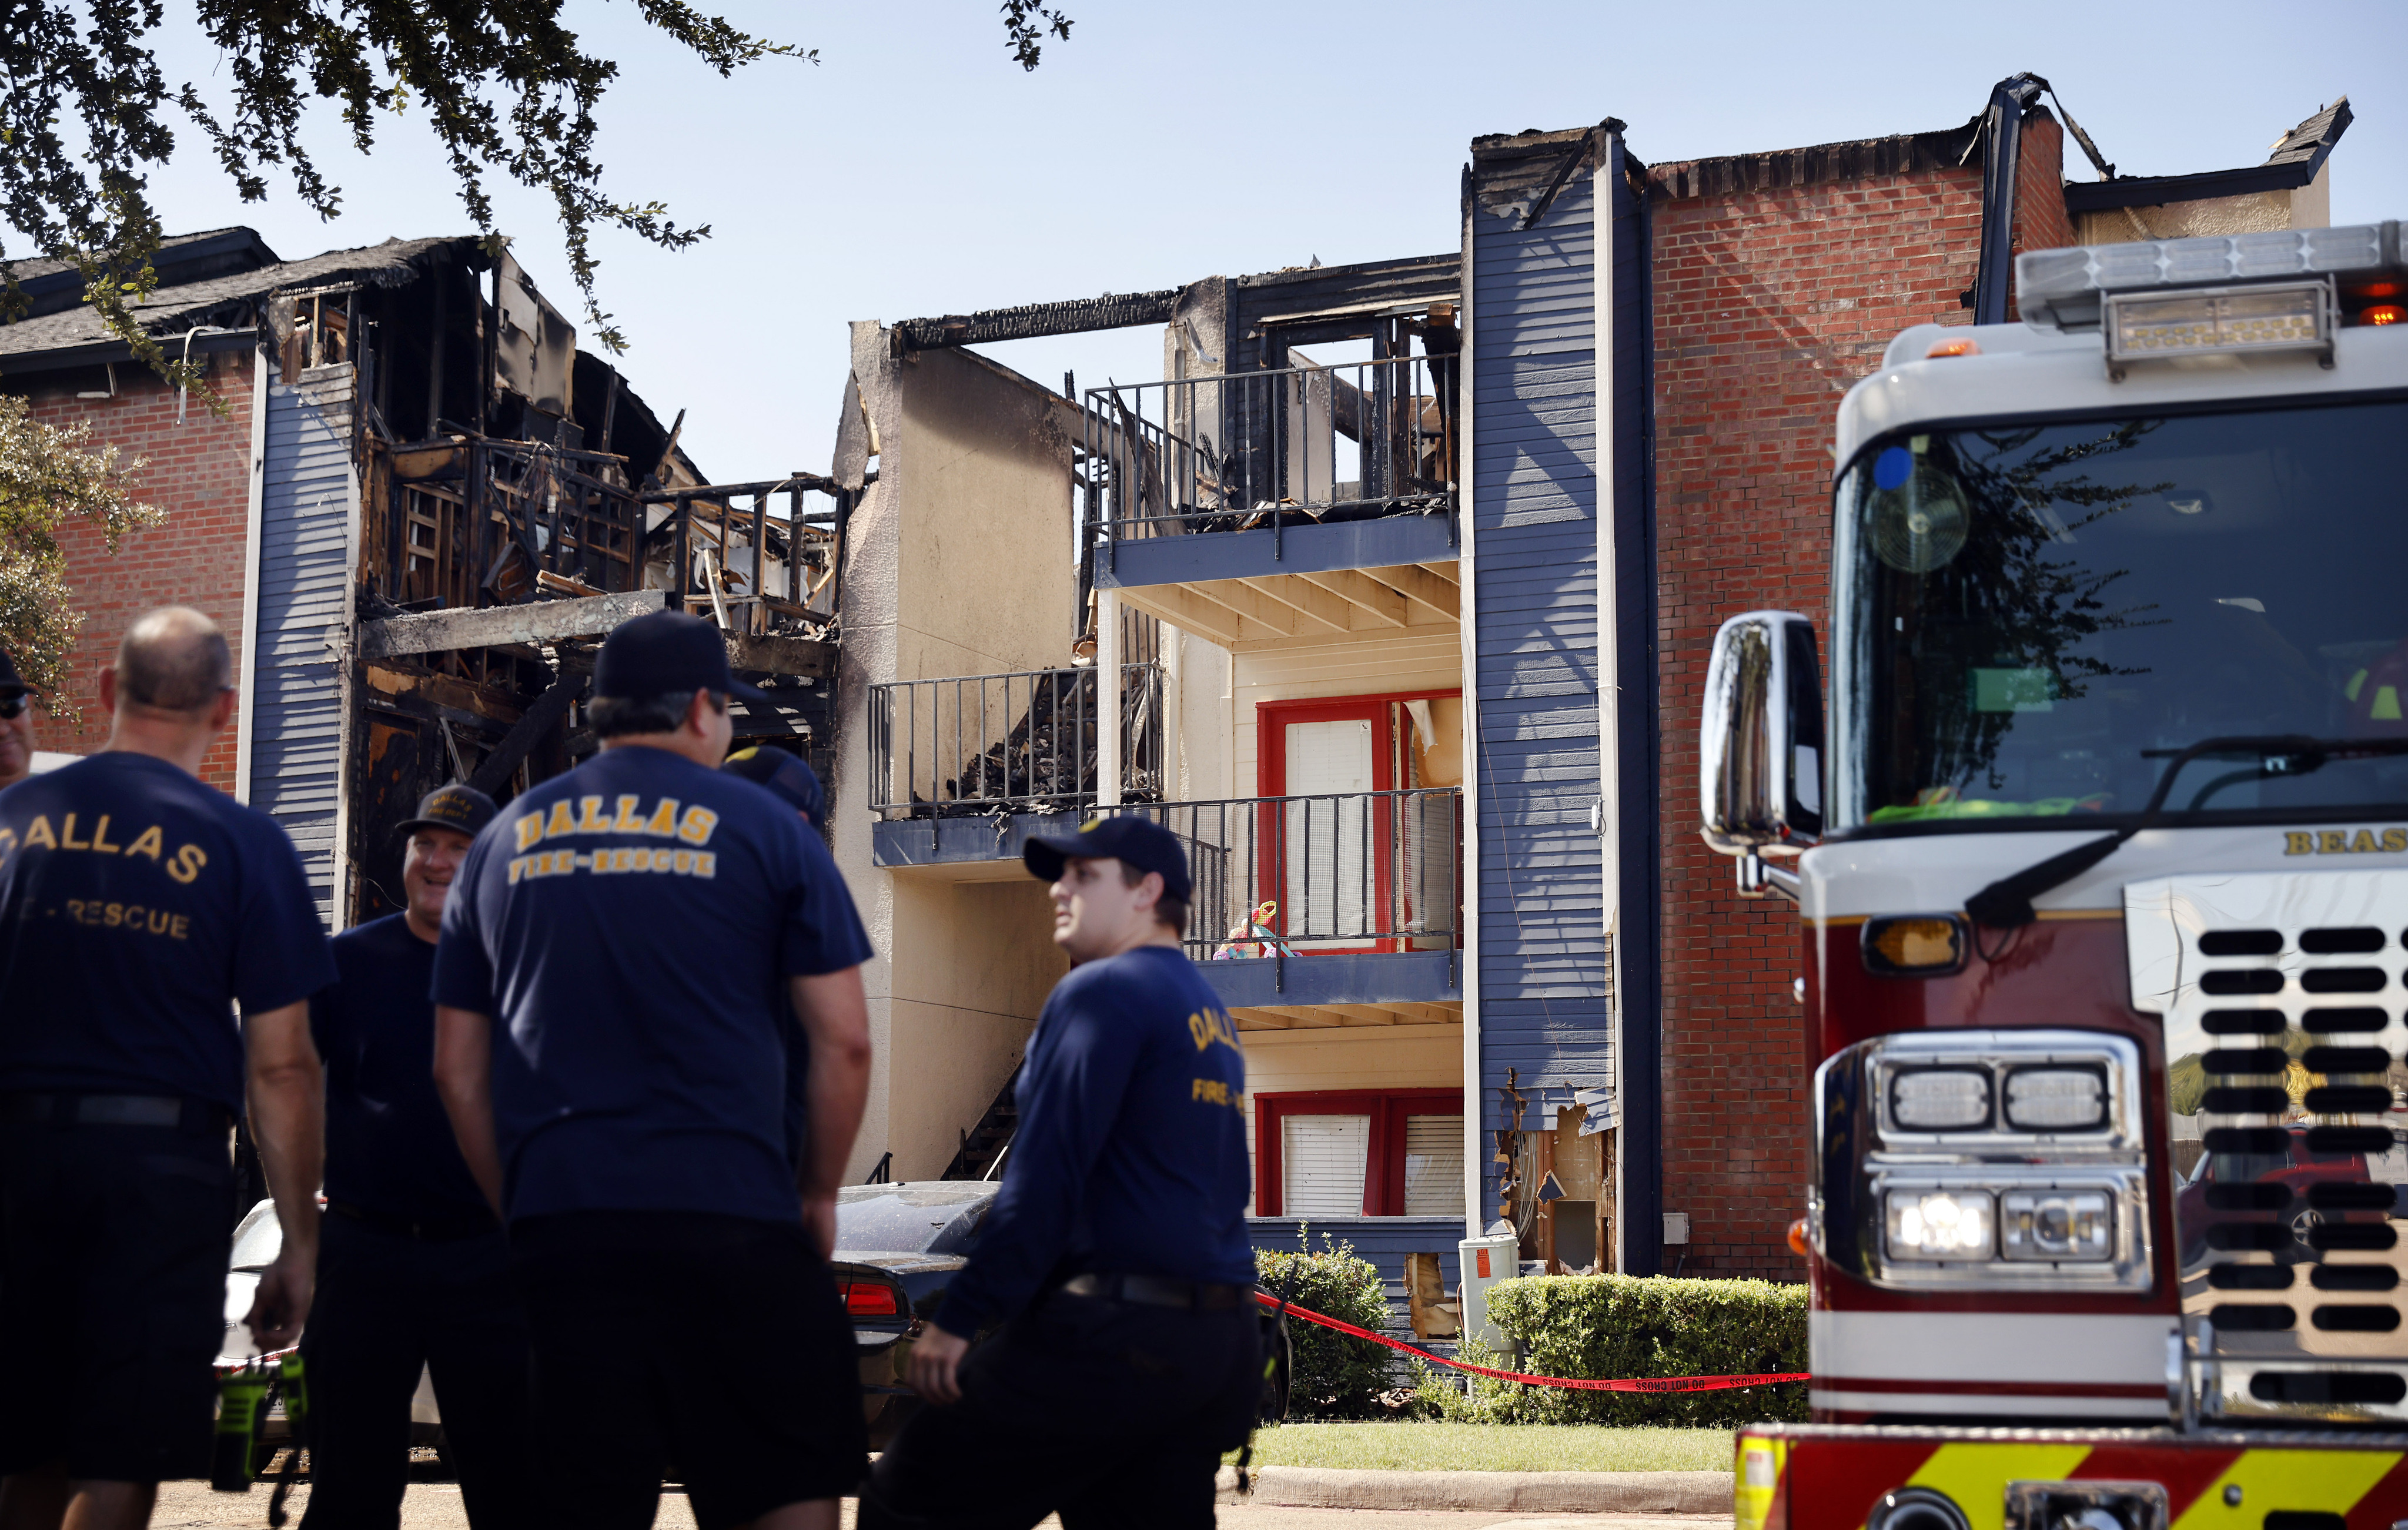 Residents Of About Two Dozen Apartments Displaced By Fire In Far East Dallas